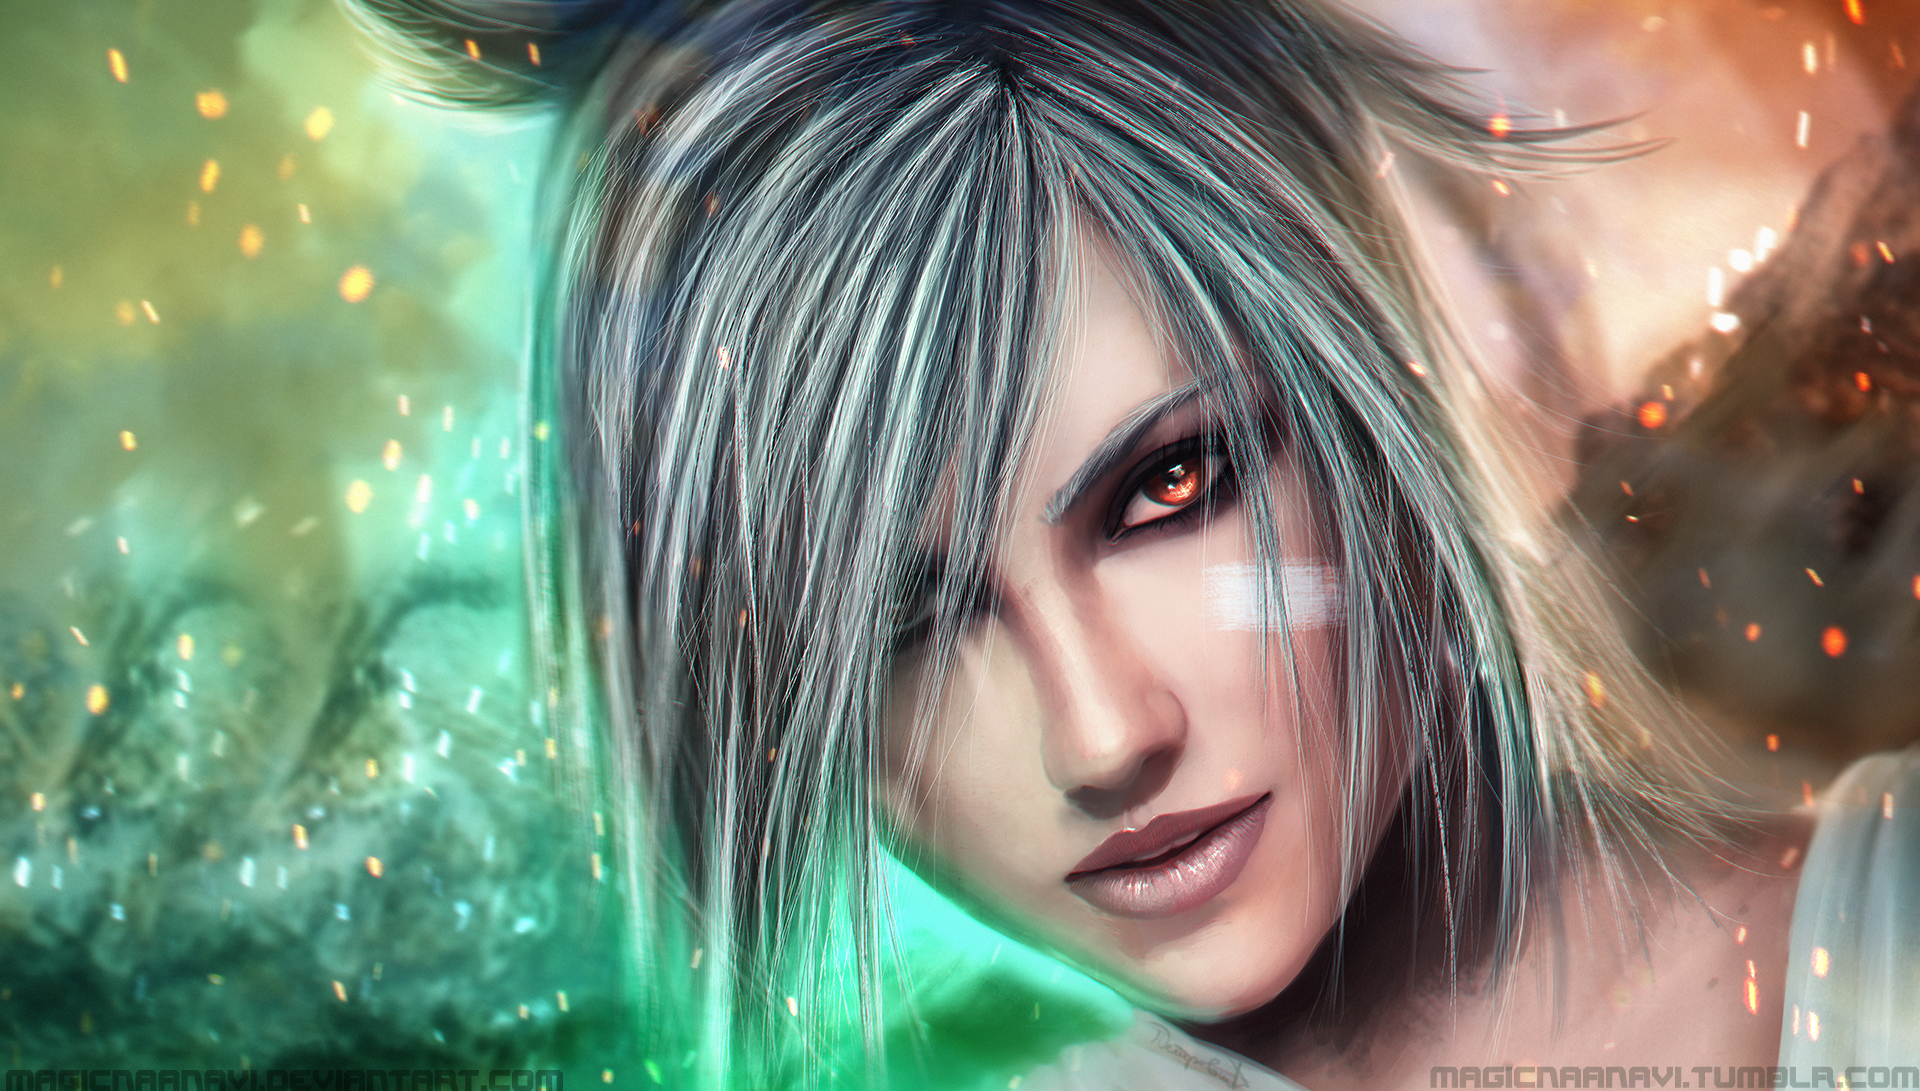 League of Legends - Riven by MagicnaAnavi